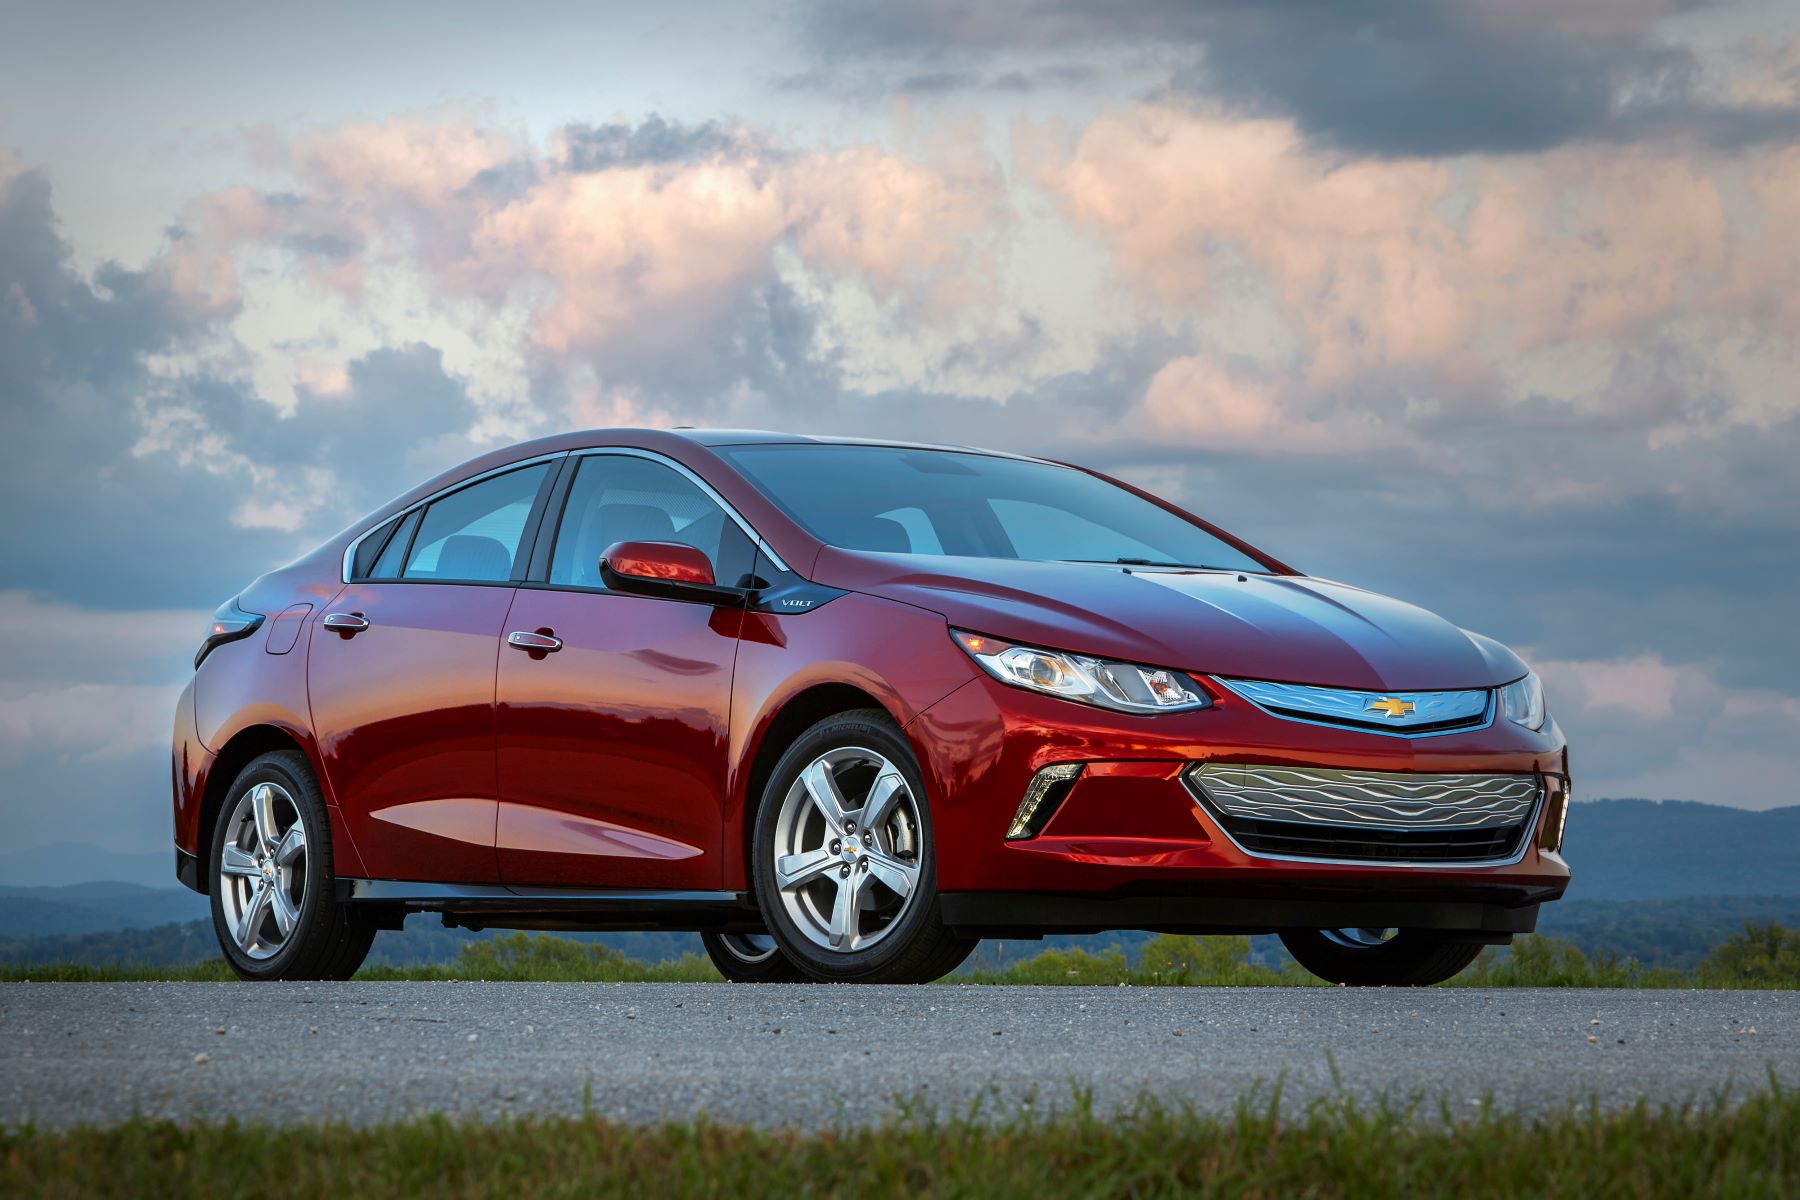 A red 2019 Chevrolet Chevy Volt plug-in hybrid electric vehicle (PHEV) model